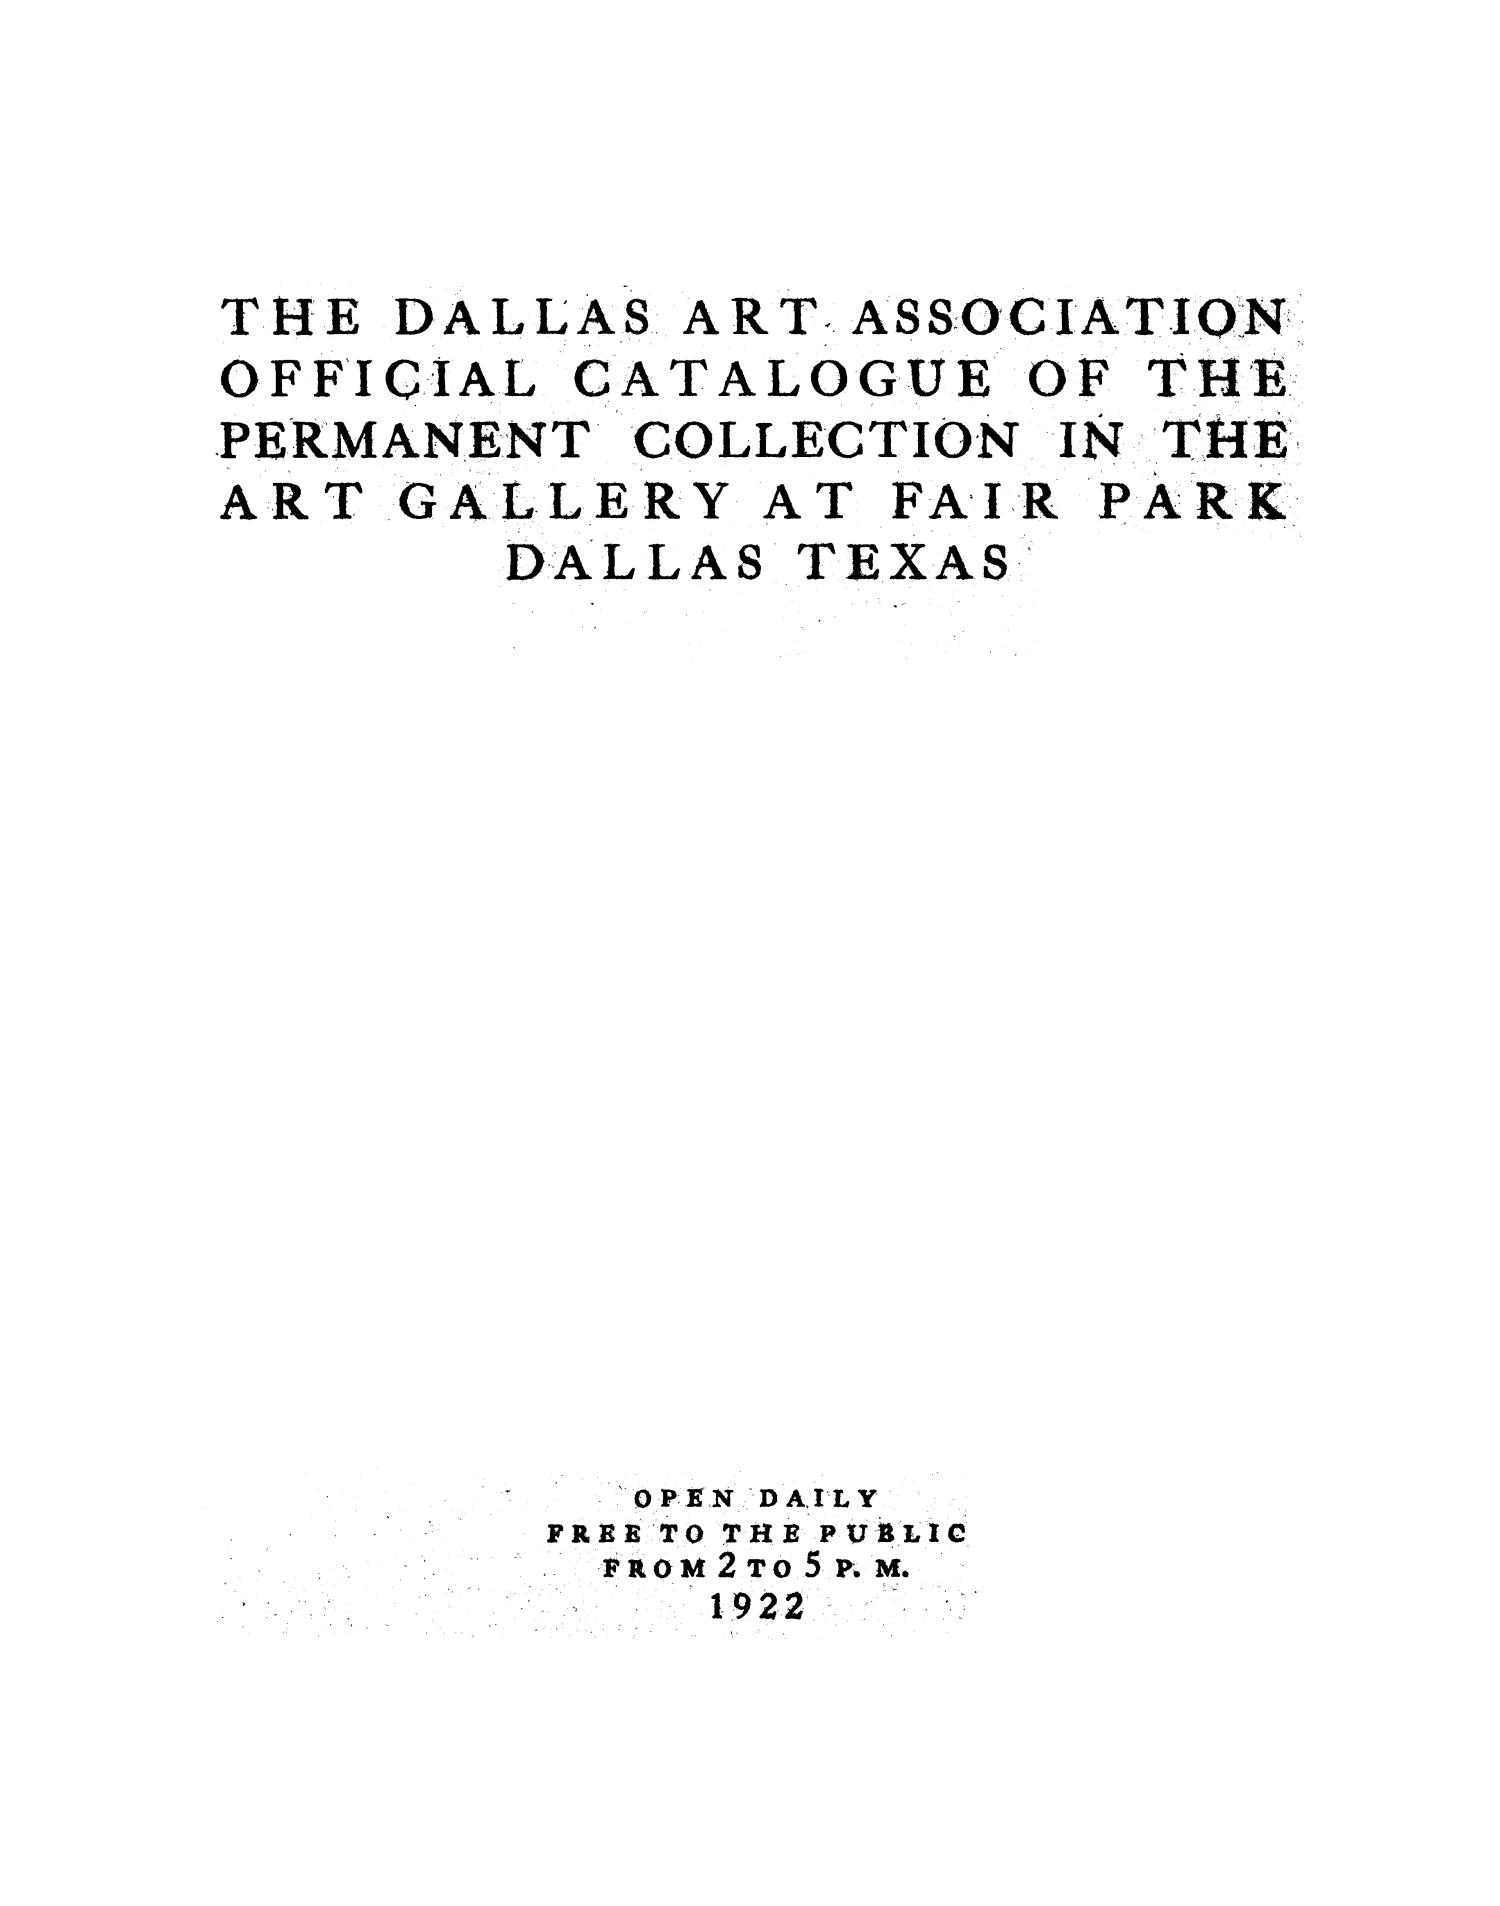 Official Catalogue of the Permanent Collection in the Art Gallery at Fair Park, Dallas, Texas
                                                
                                                    Front Cover
                                                